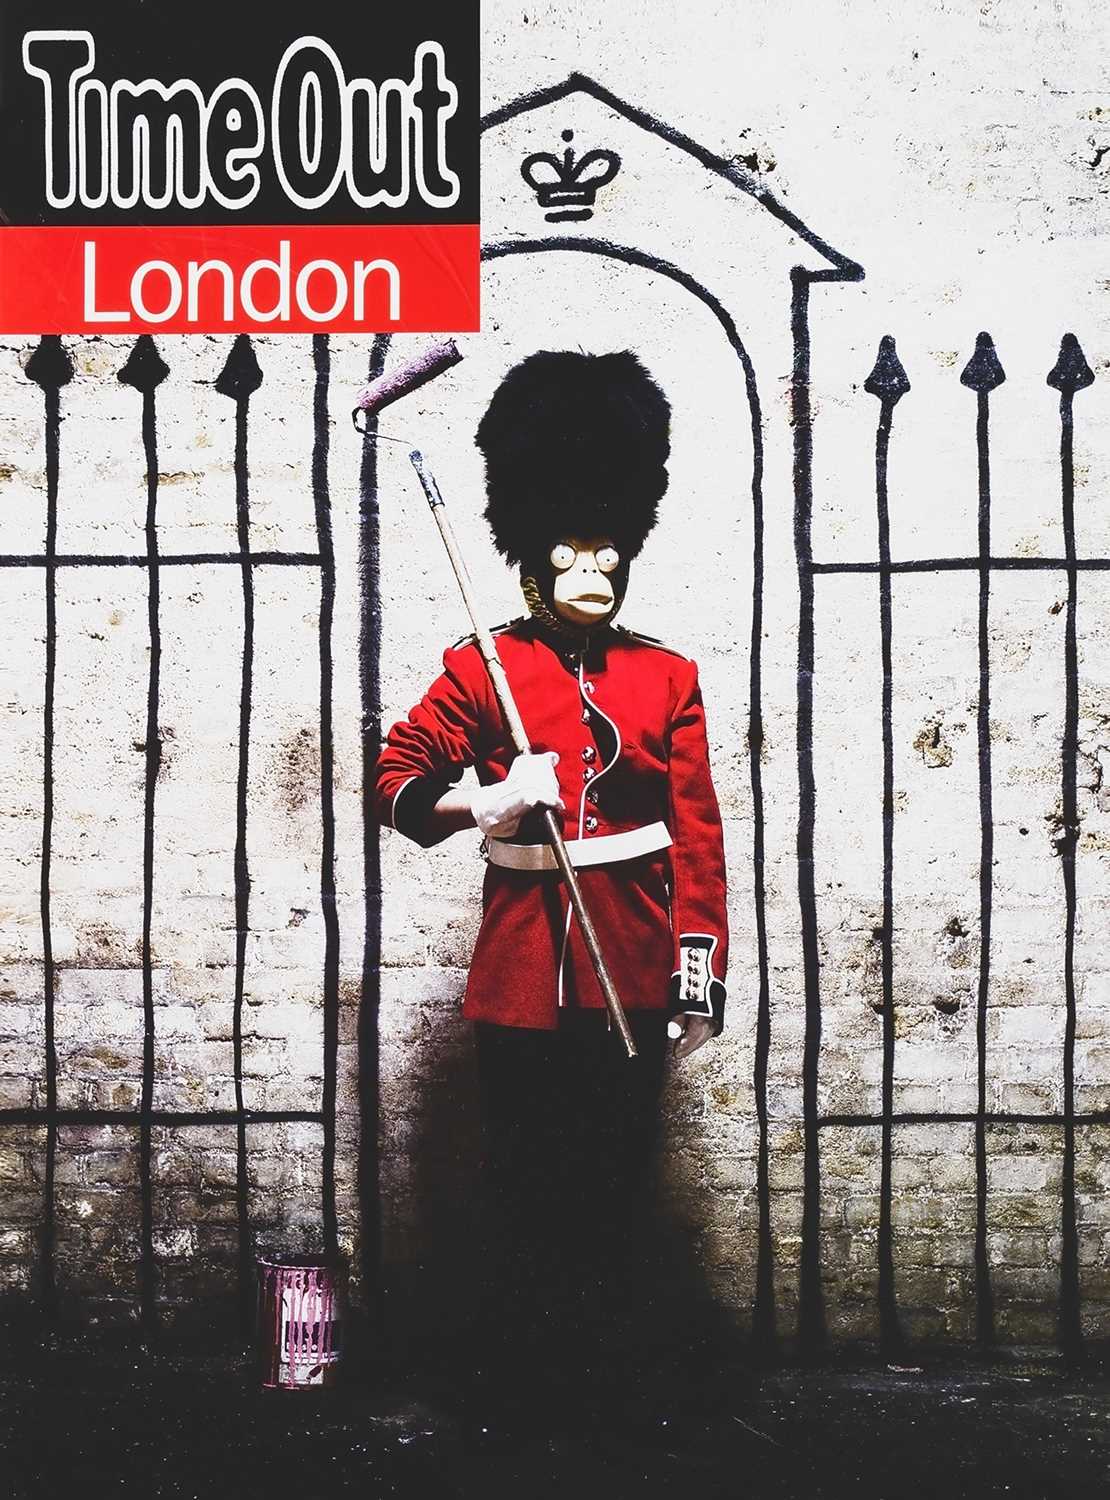 Lot 14 - Banksy (British 1974-), 'Time Out London', 2010